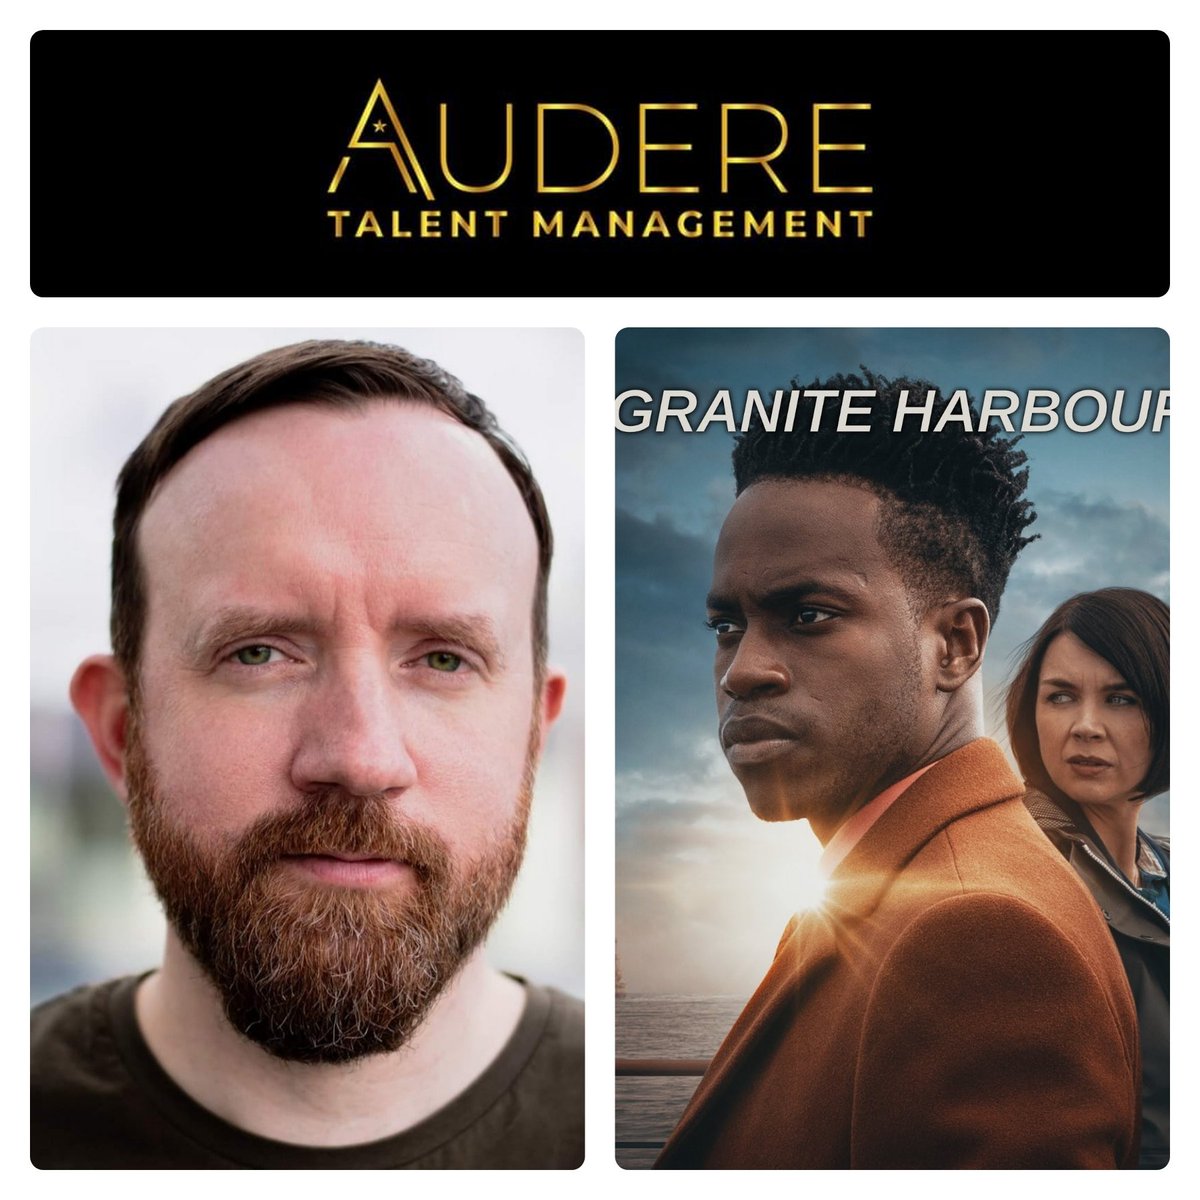 Season 2 of 'Granite Harbour' is now available on @BBCiPlayer and on @BBCScotland this evening and @BBCOne tomorrow featuring our own FRASER SIVEWRIGHT (@FraserSive123)!